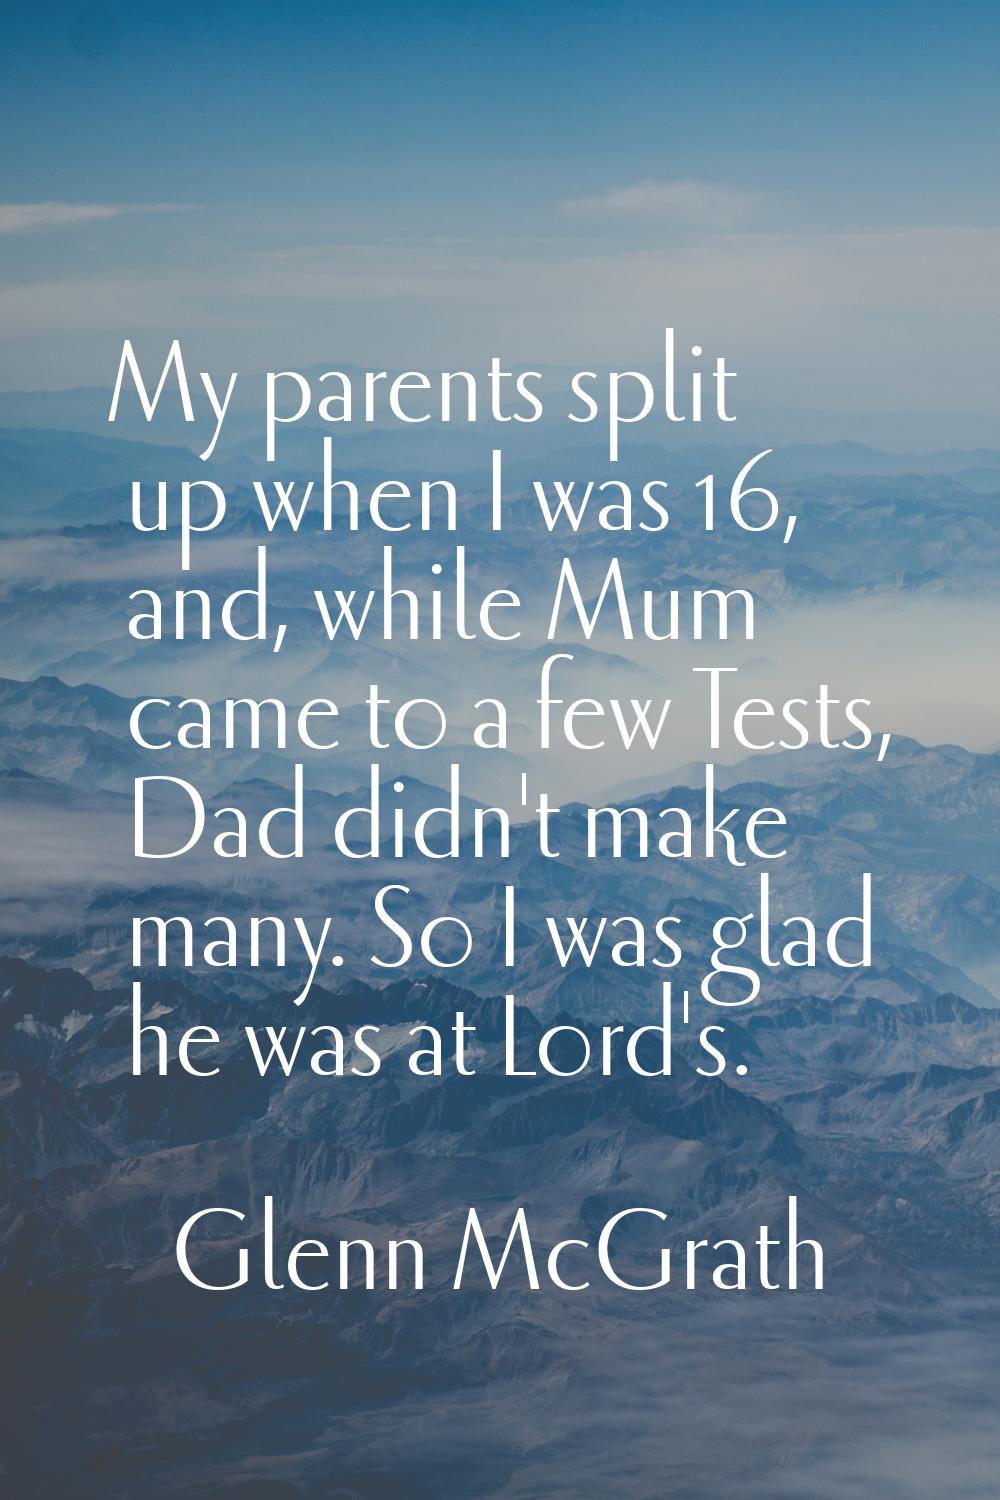 My parents split up when I was 16, and, while Mum came to a few Tests, Dad didn't make many. So I w